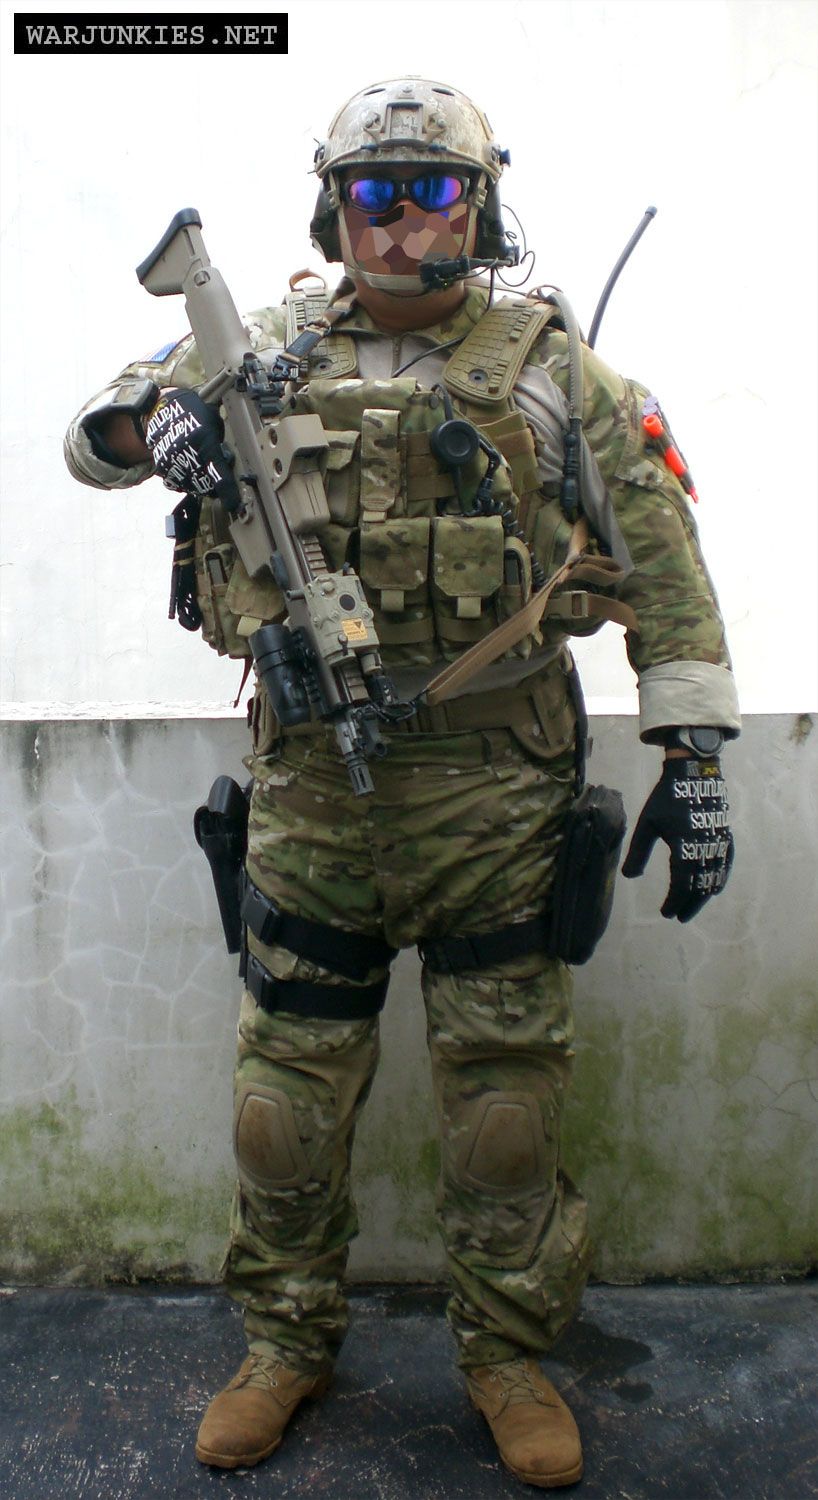 PMC Loadout. *Update*